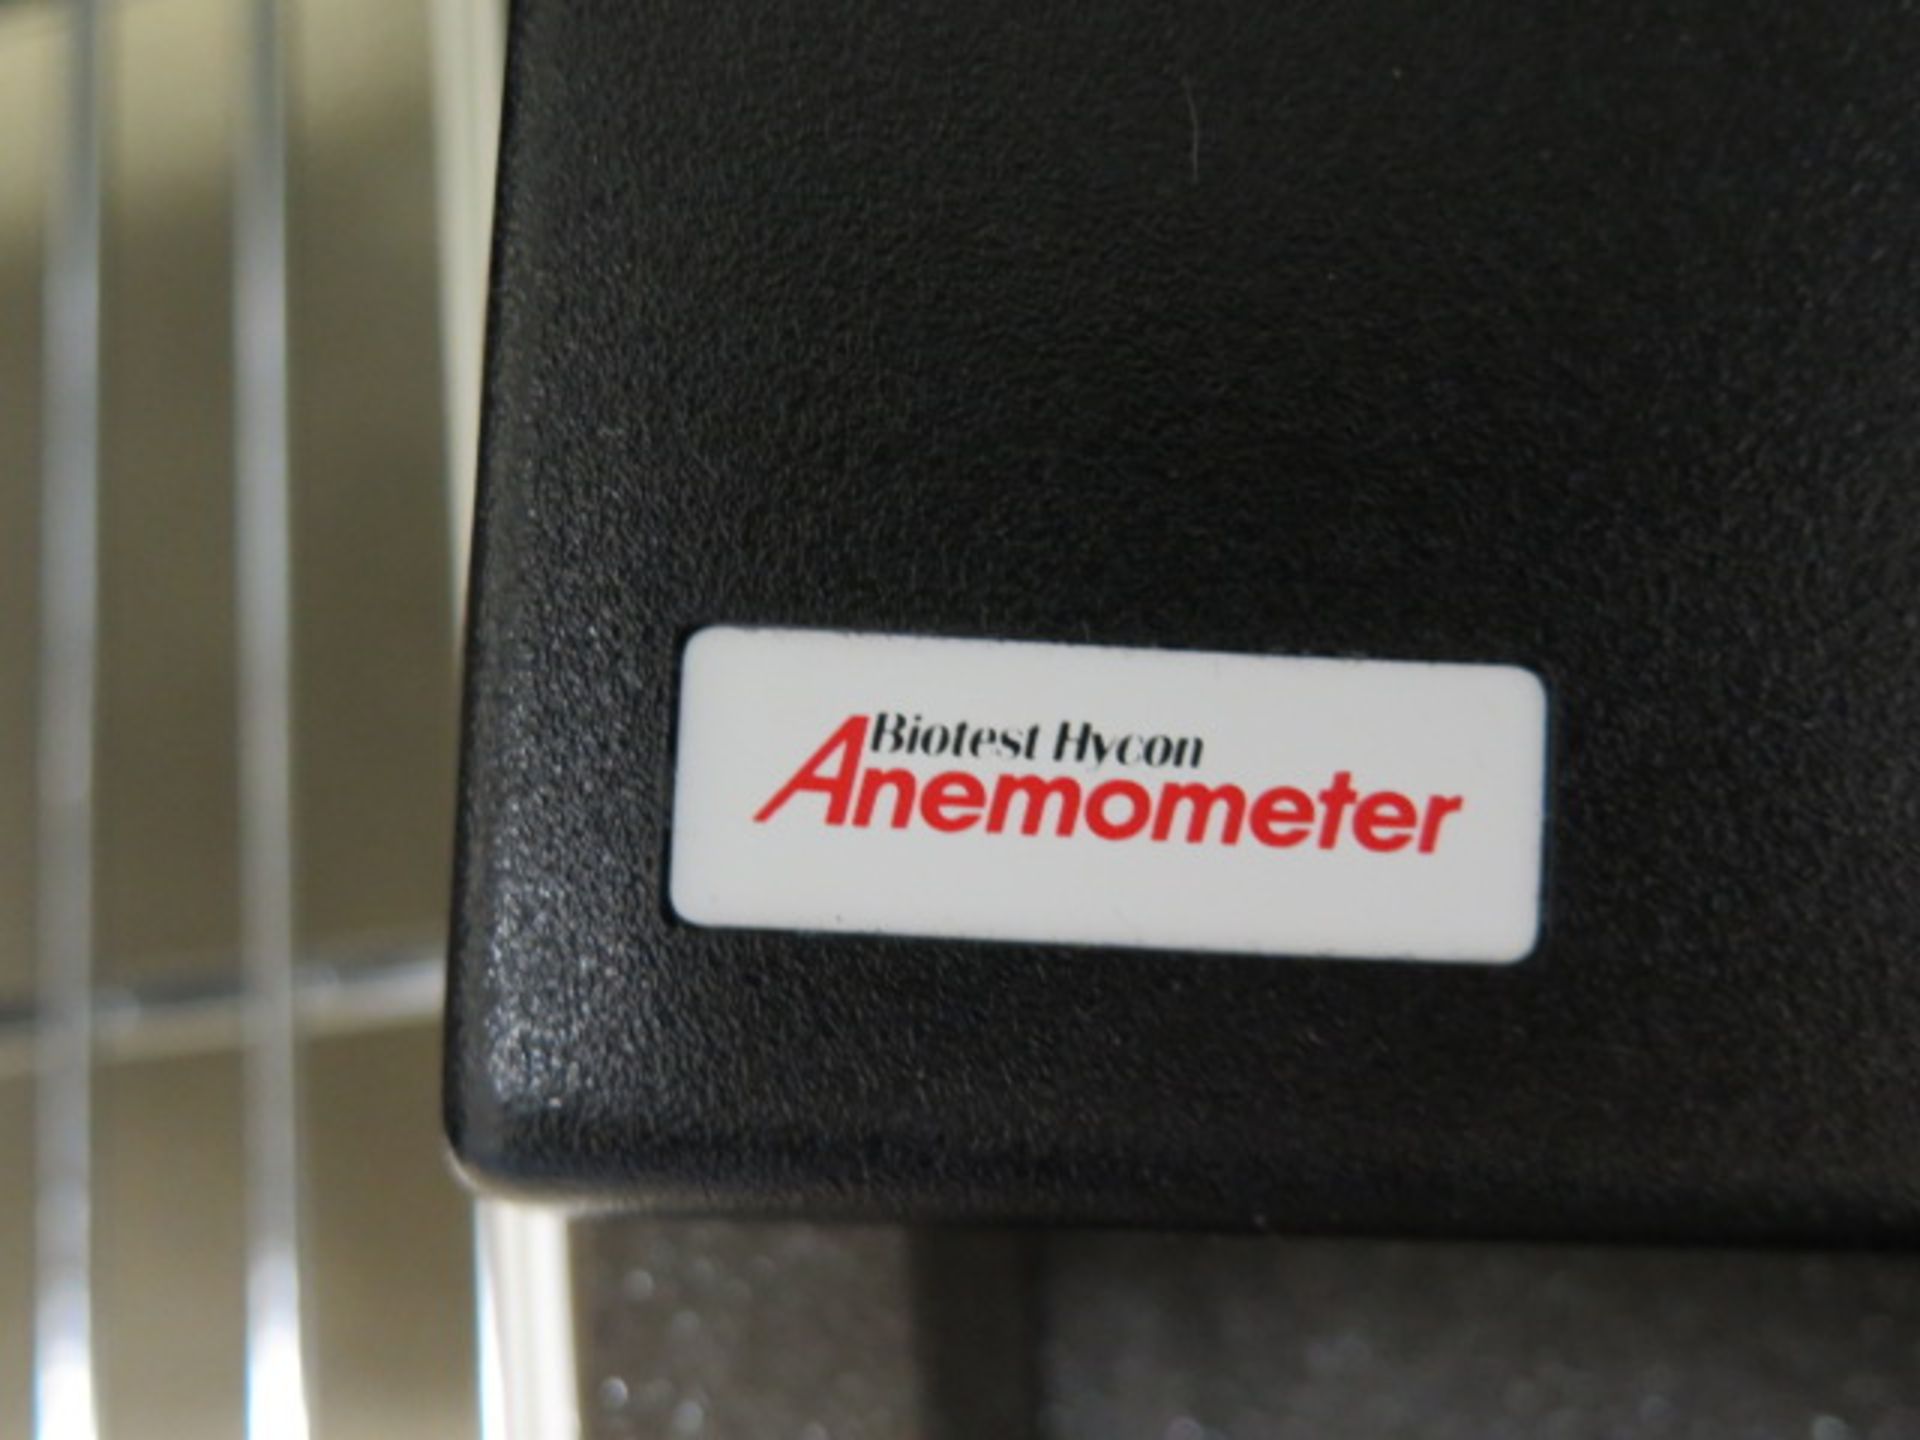 Biotest Hycom Anemometer (SOLD AS-IS - NO WARRANTY) - Image 5 of 6